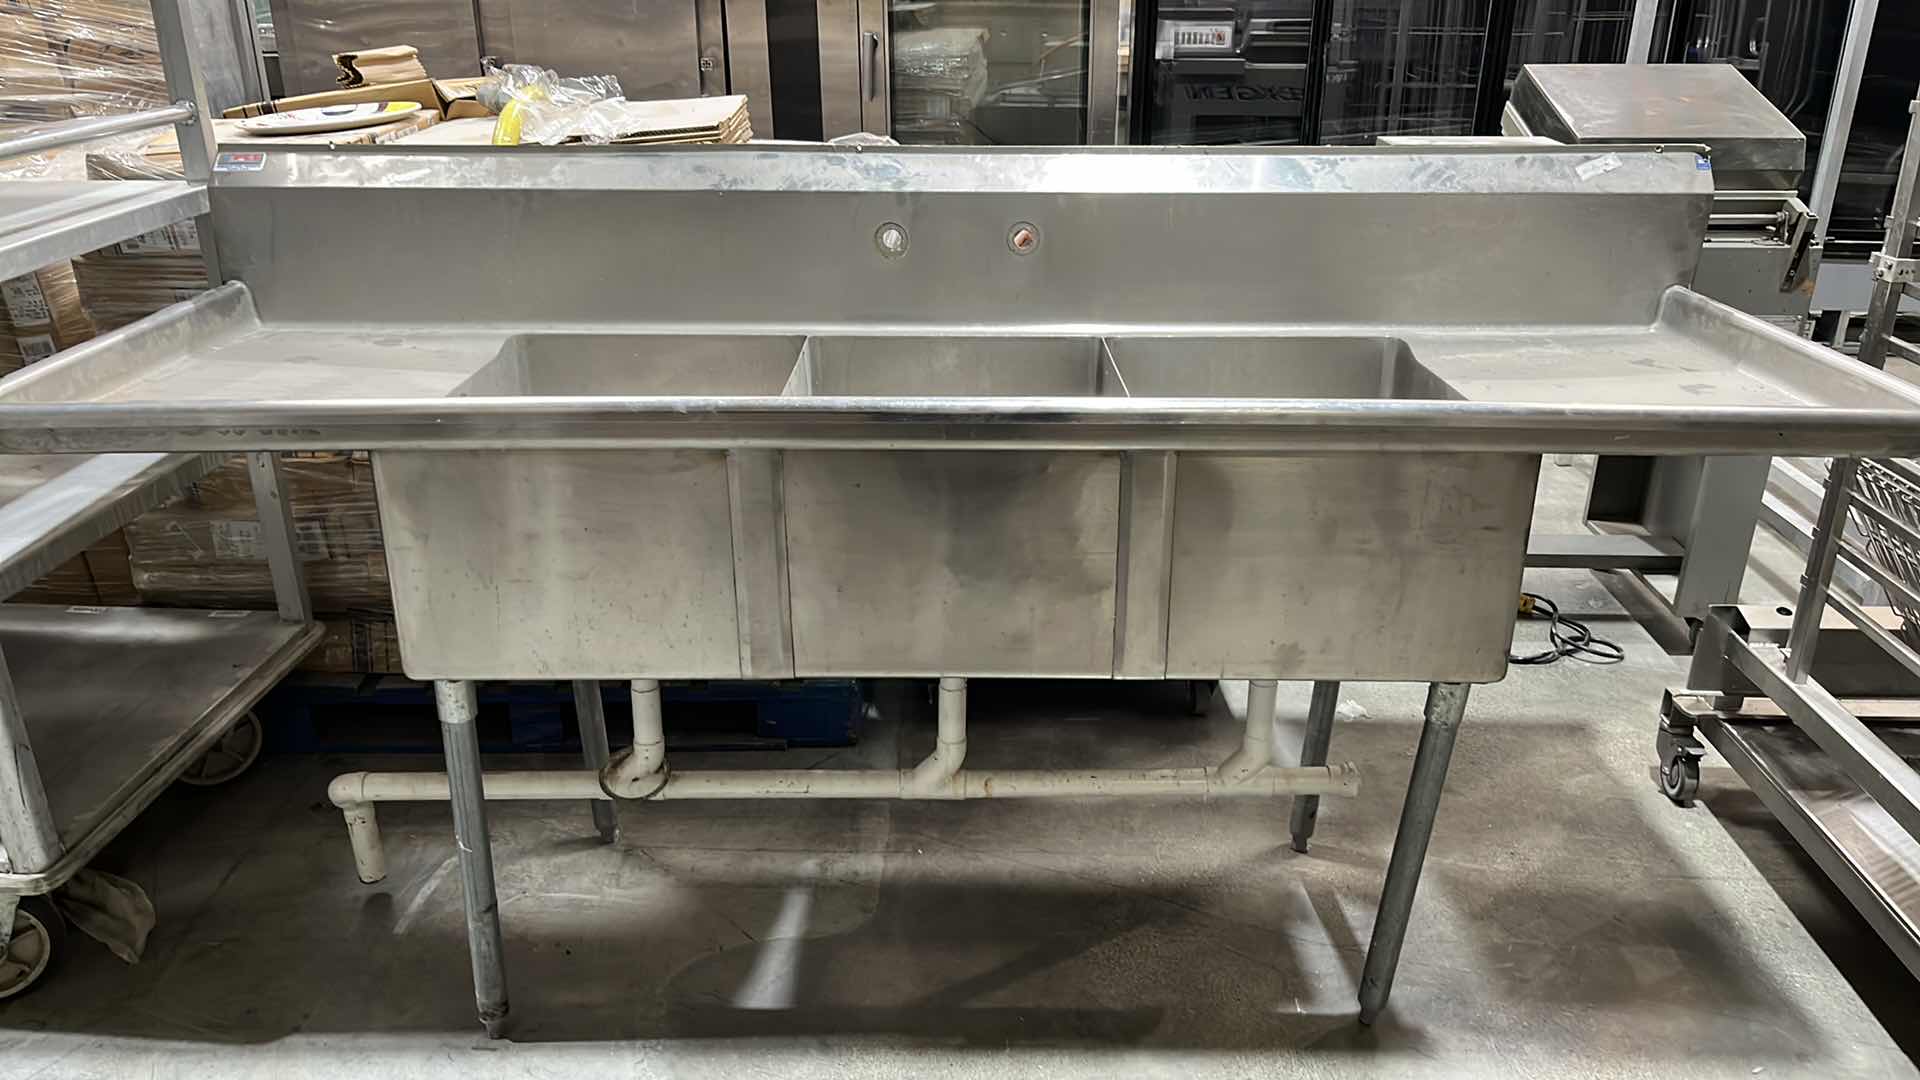 Photo 1 of STAINLESS STEEL COMMERCIAL THREE COMPARTMENT KITCHEN SINK W TWO DRAINBOARDS 29.75” X 90”